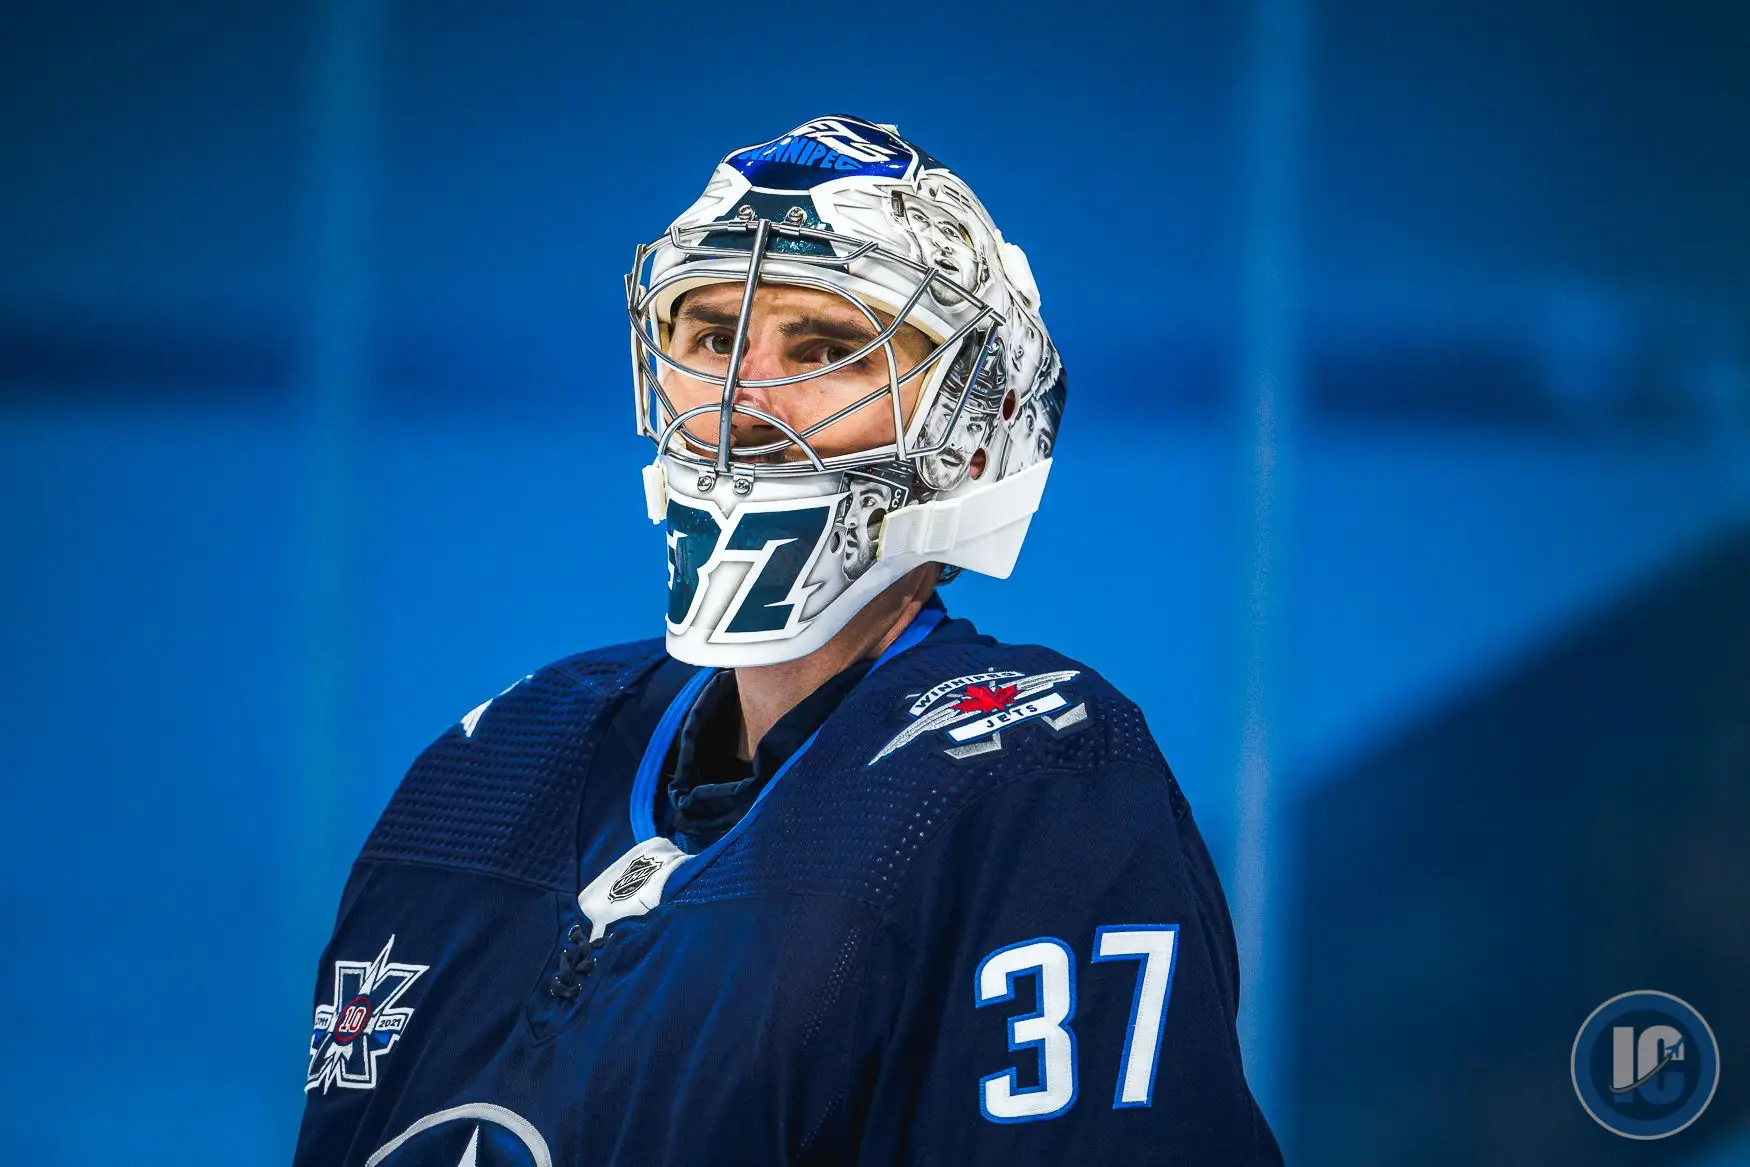 Connor Hellebuyck close up